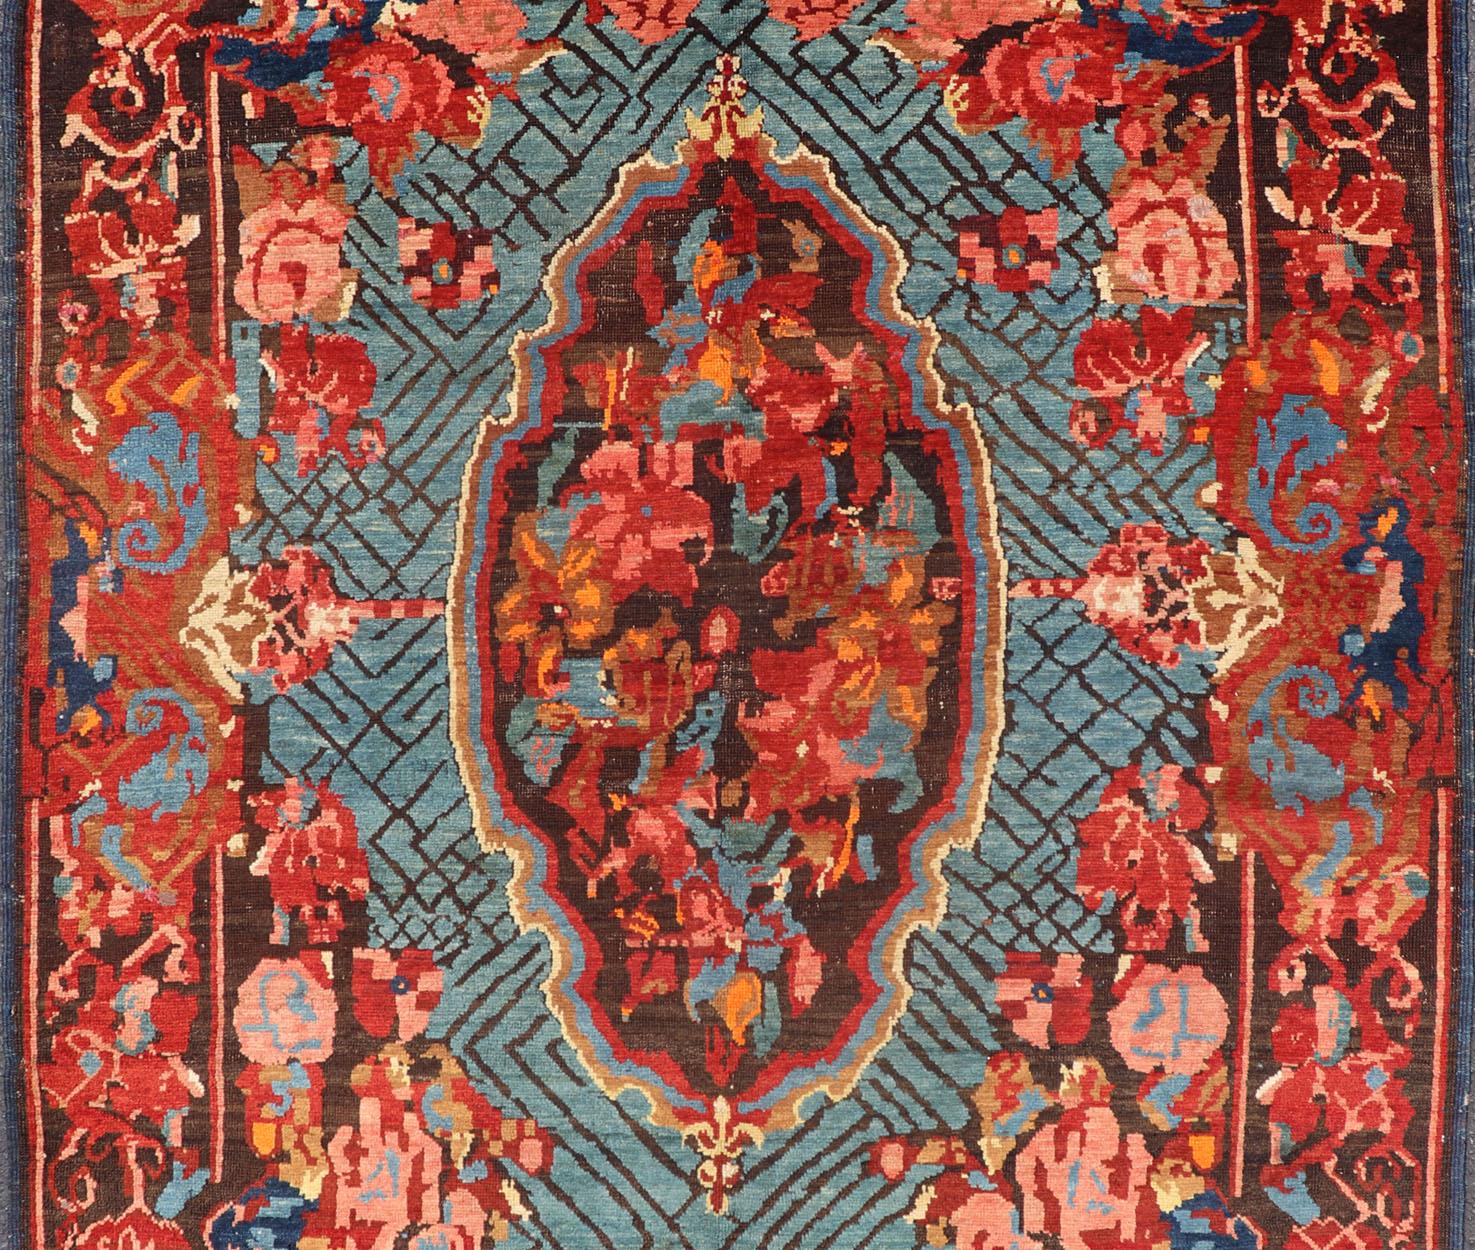 Antique Caucasian Kuba Rug with a Central Floral Medallion In Excellent Condition For Sale In Atlanta, GA